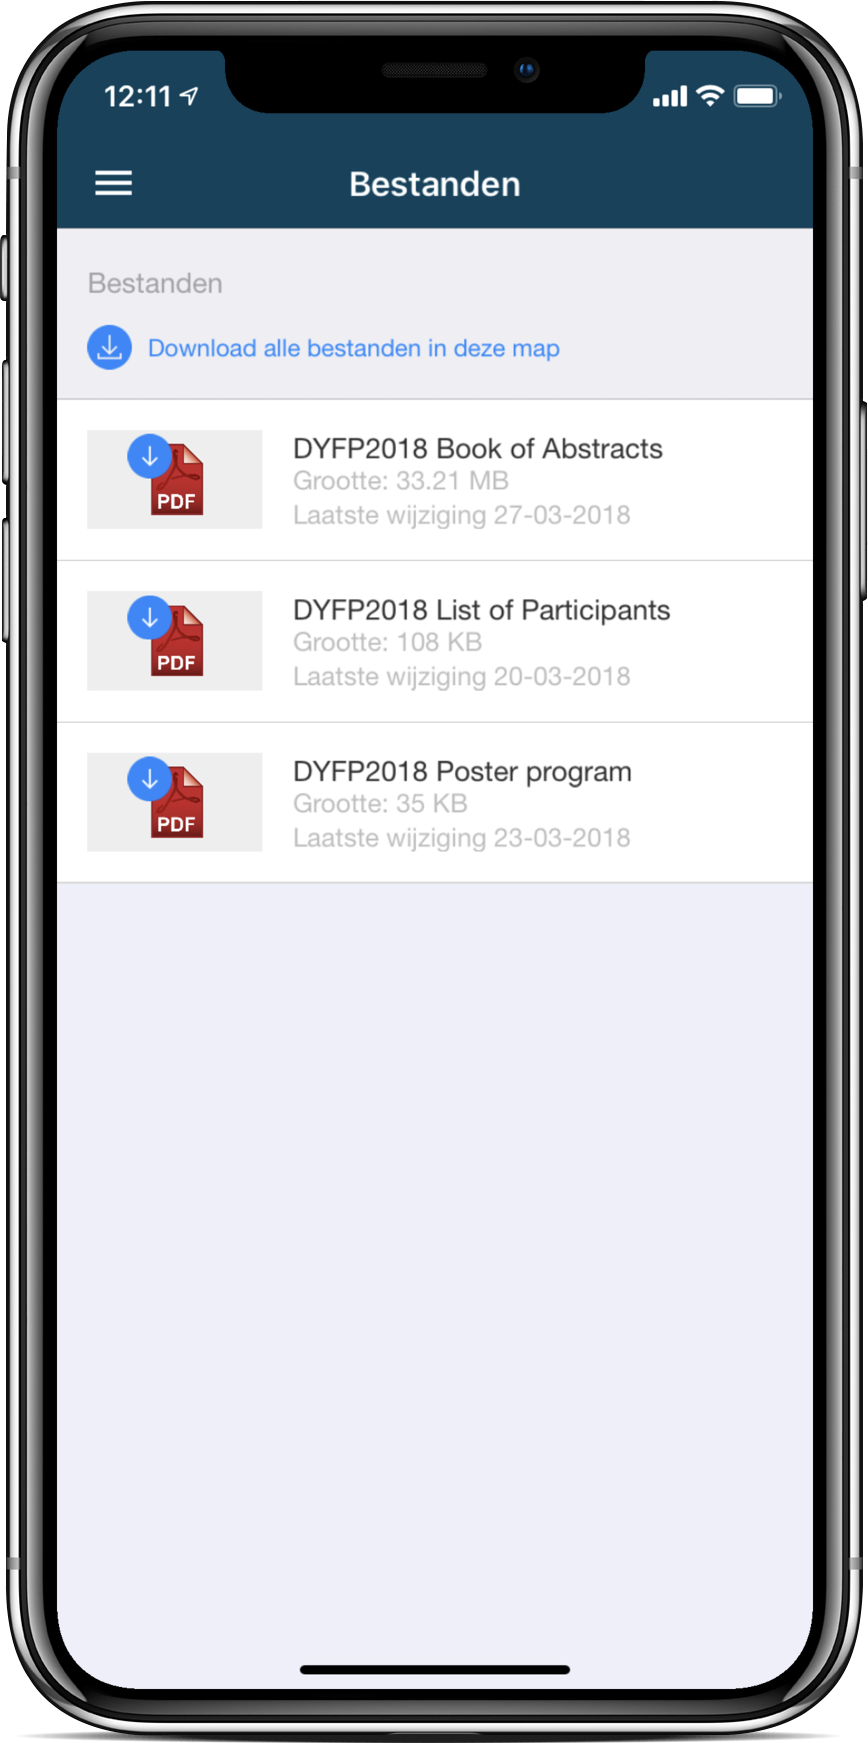 TU Eindhoven - Stichting Materials Technology - DYFP Conference iO & Android app, Website & CMS